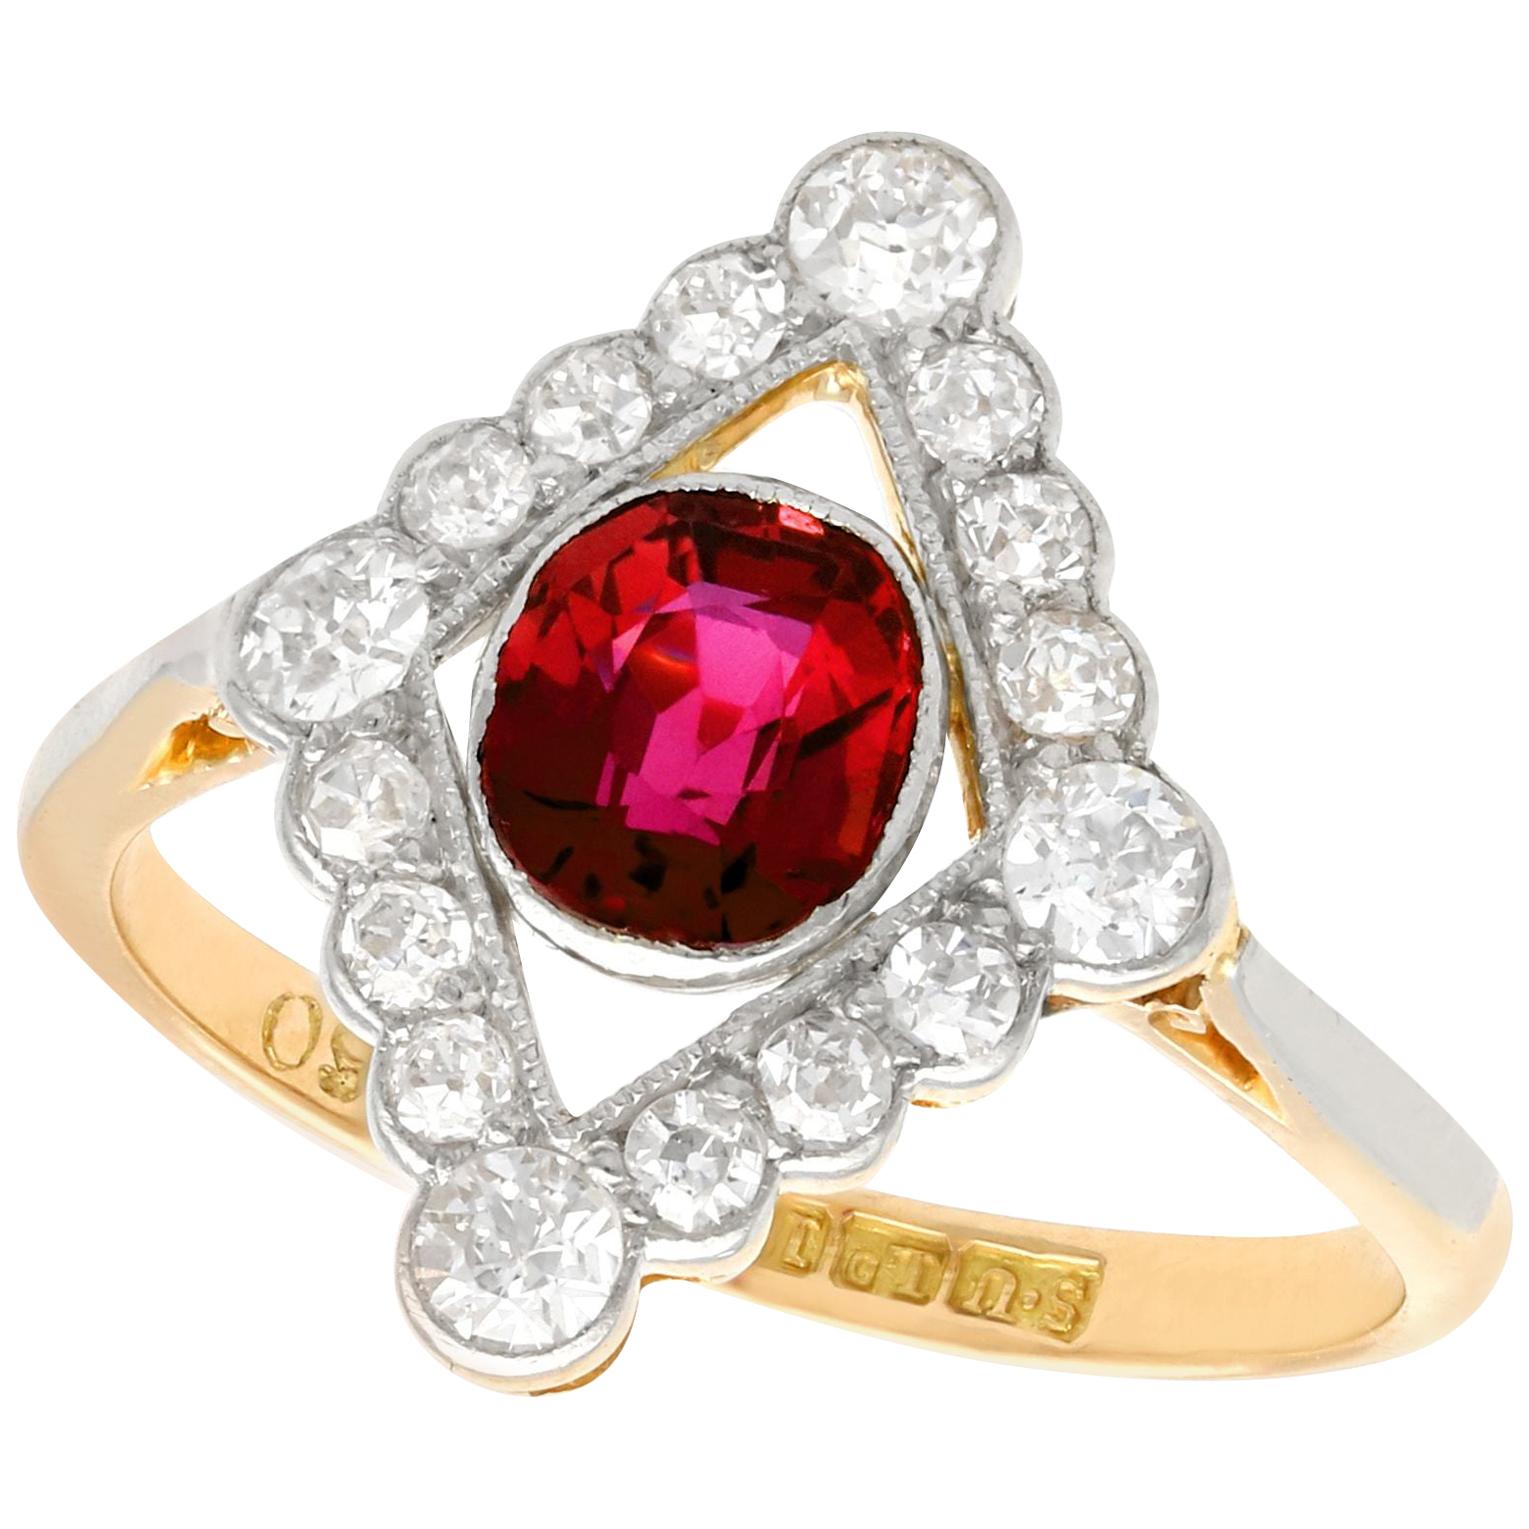 1.20 Carat Siam Ruby and 1.09 Carat Diamond Yellow Gold Ring Antique, 1920s